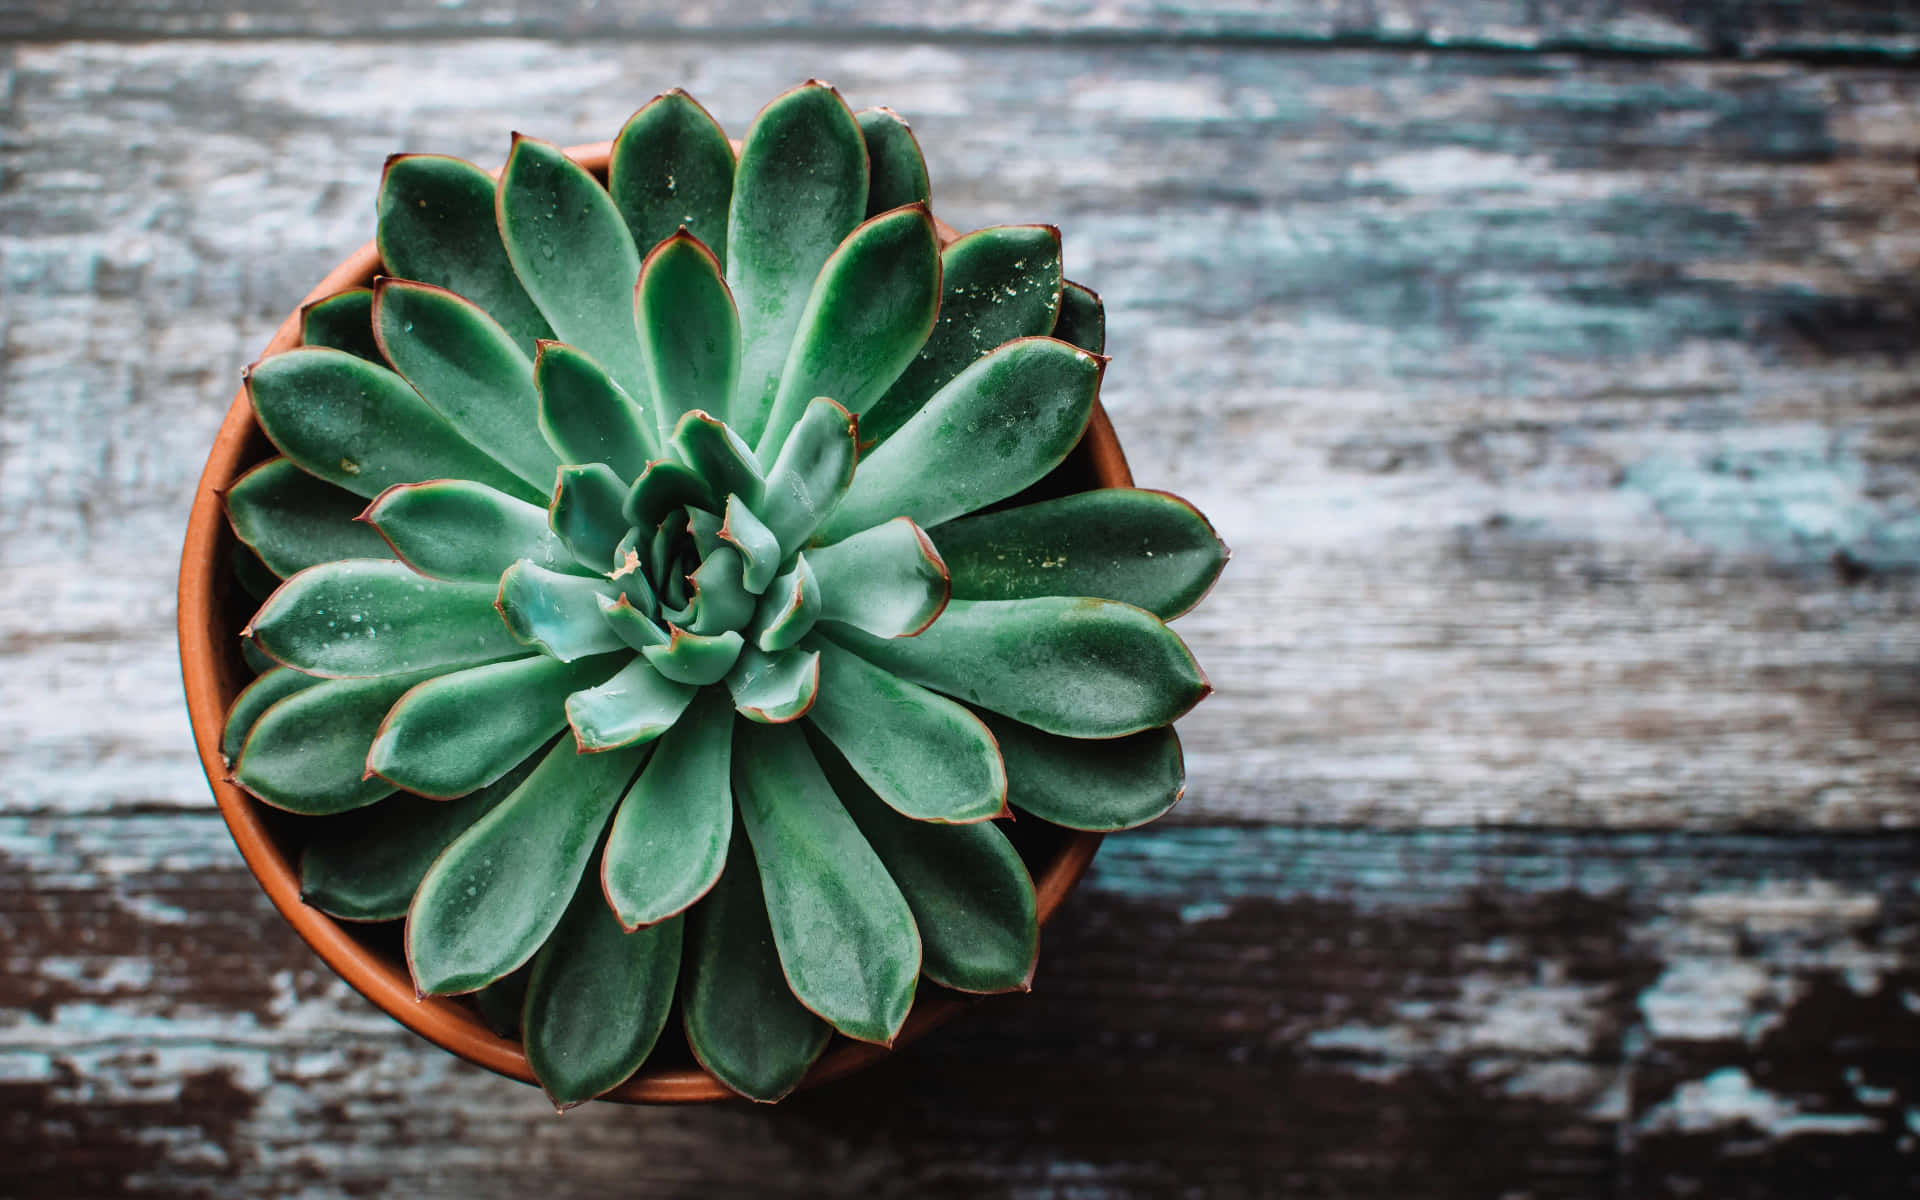 A Succulent Plant In A Pot On A Wooden Table